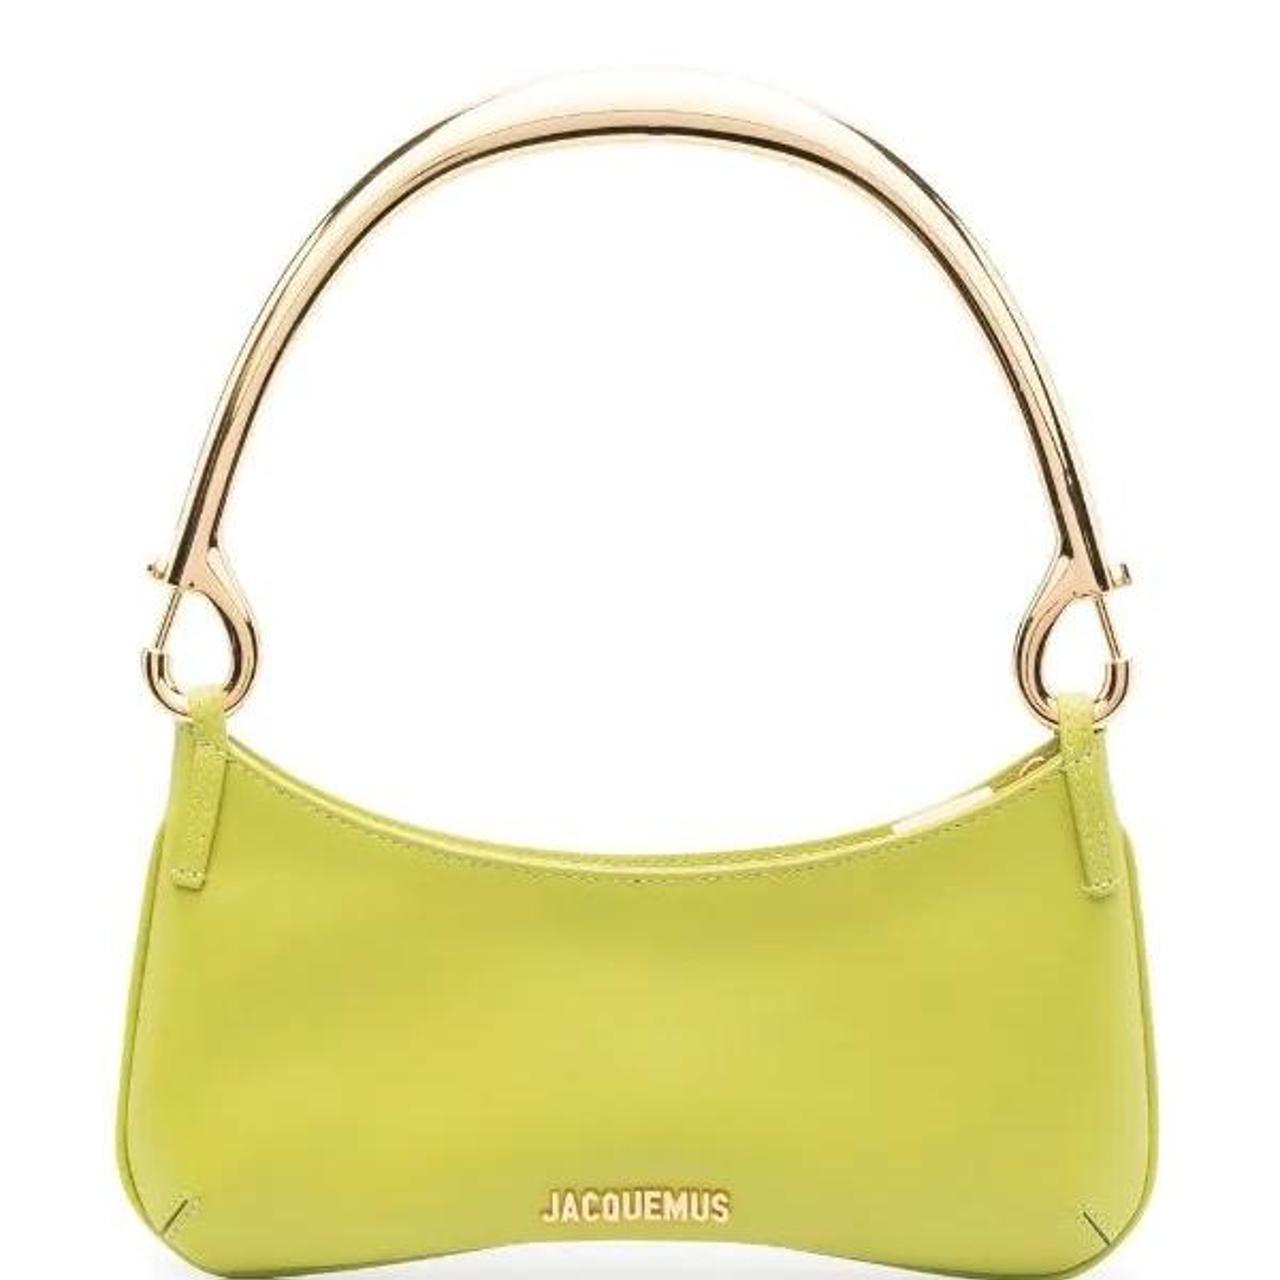 Jacquemus Women's Green and Gold Bag